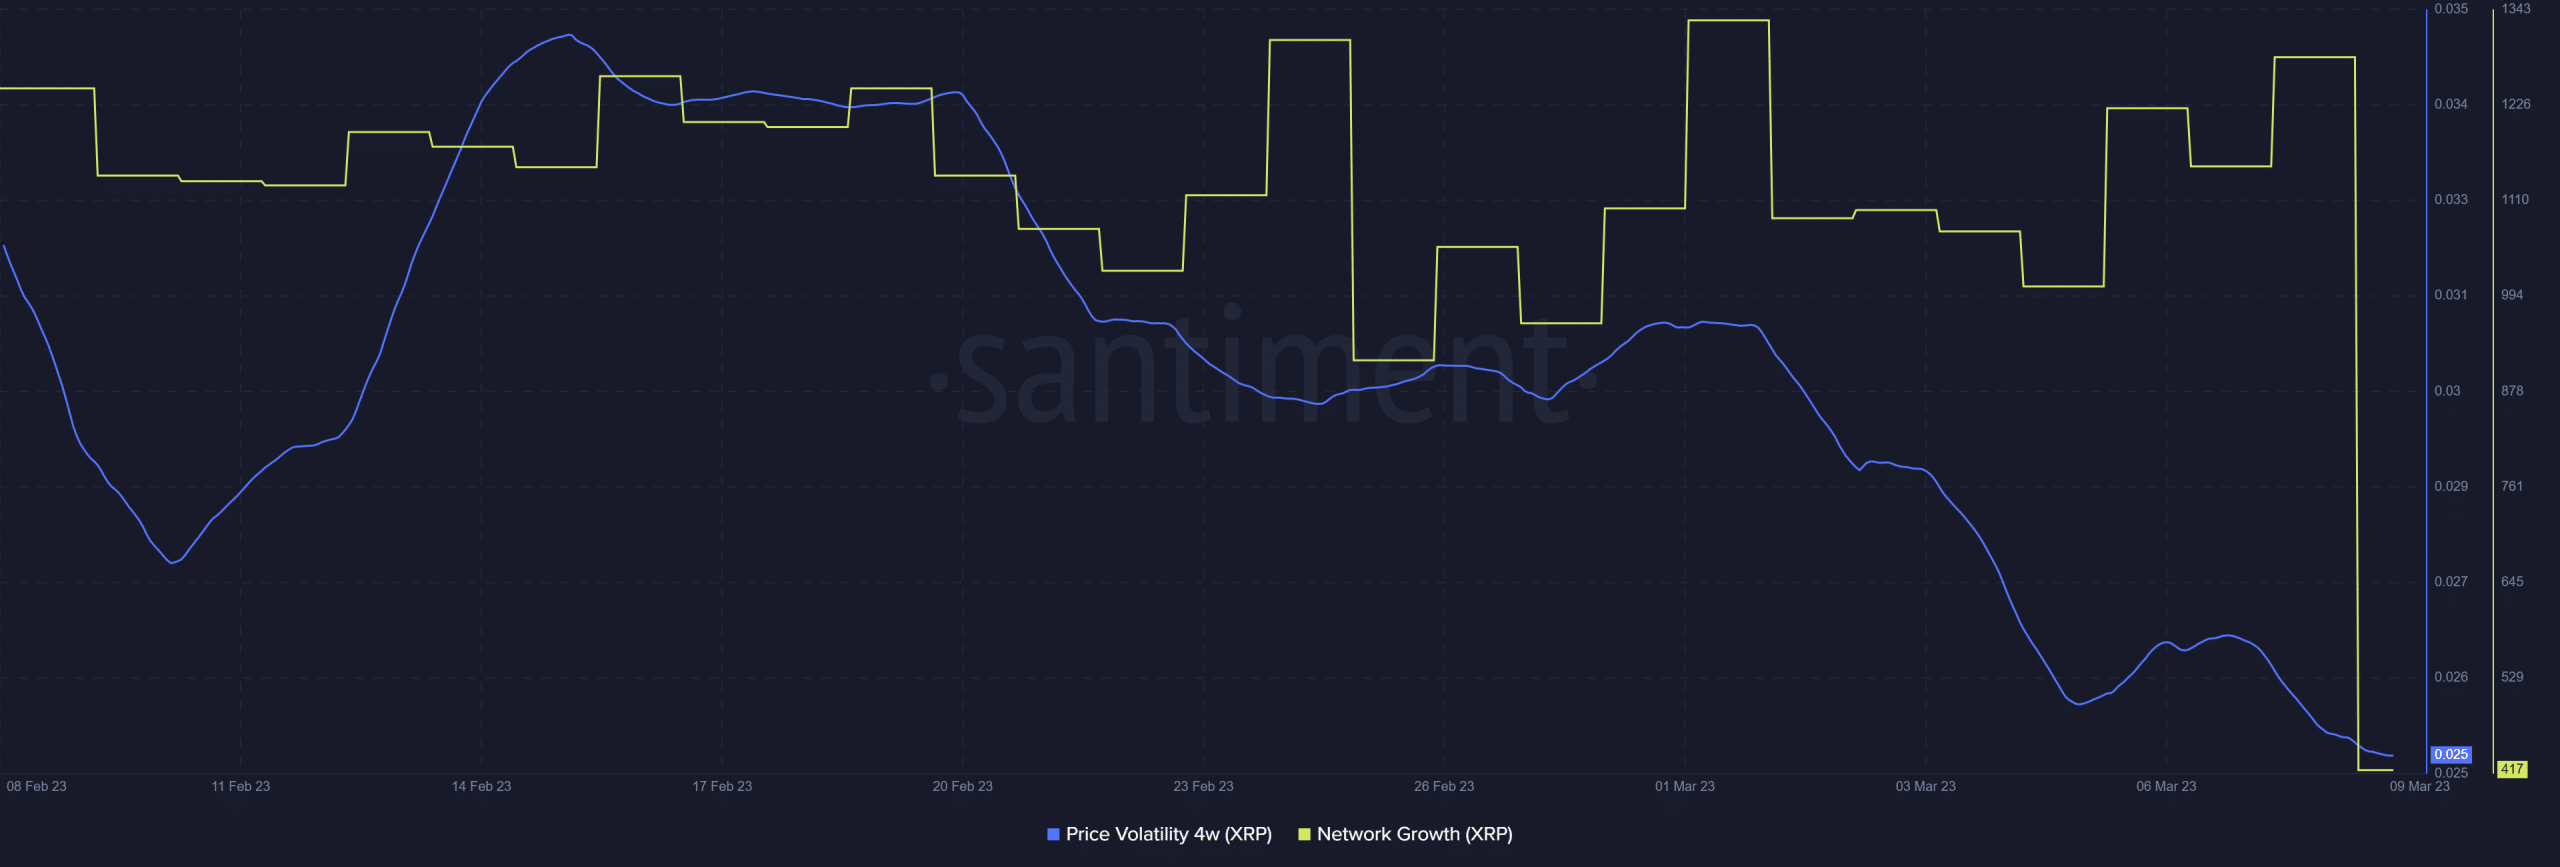 XRP price volatility and network growth